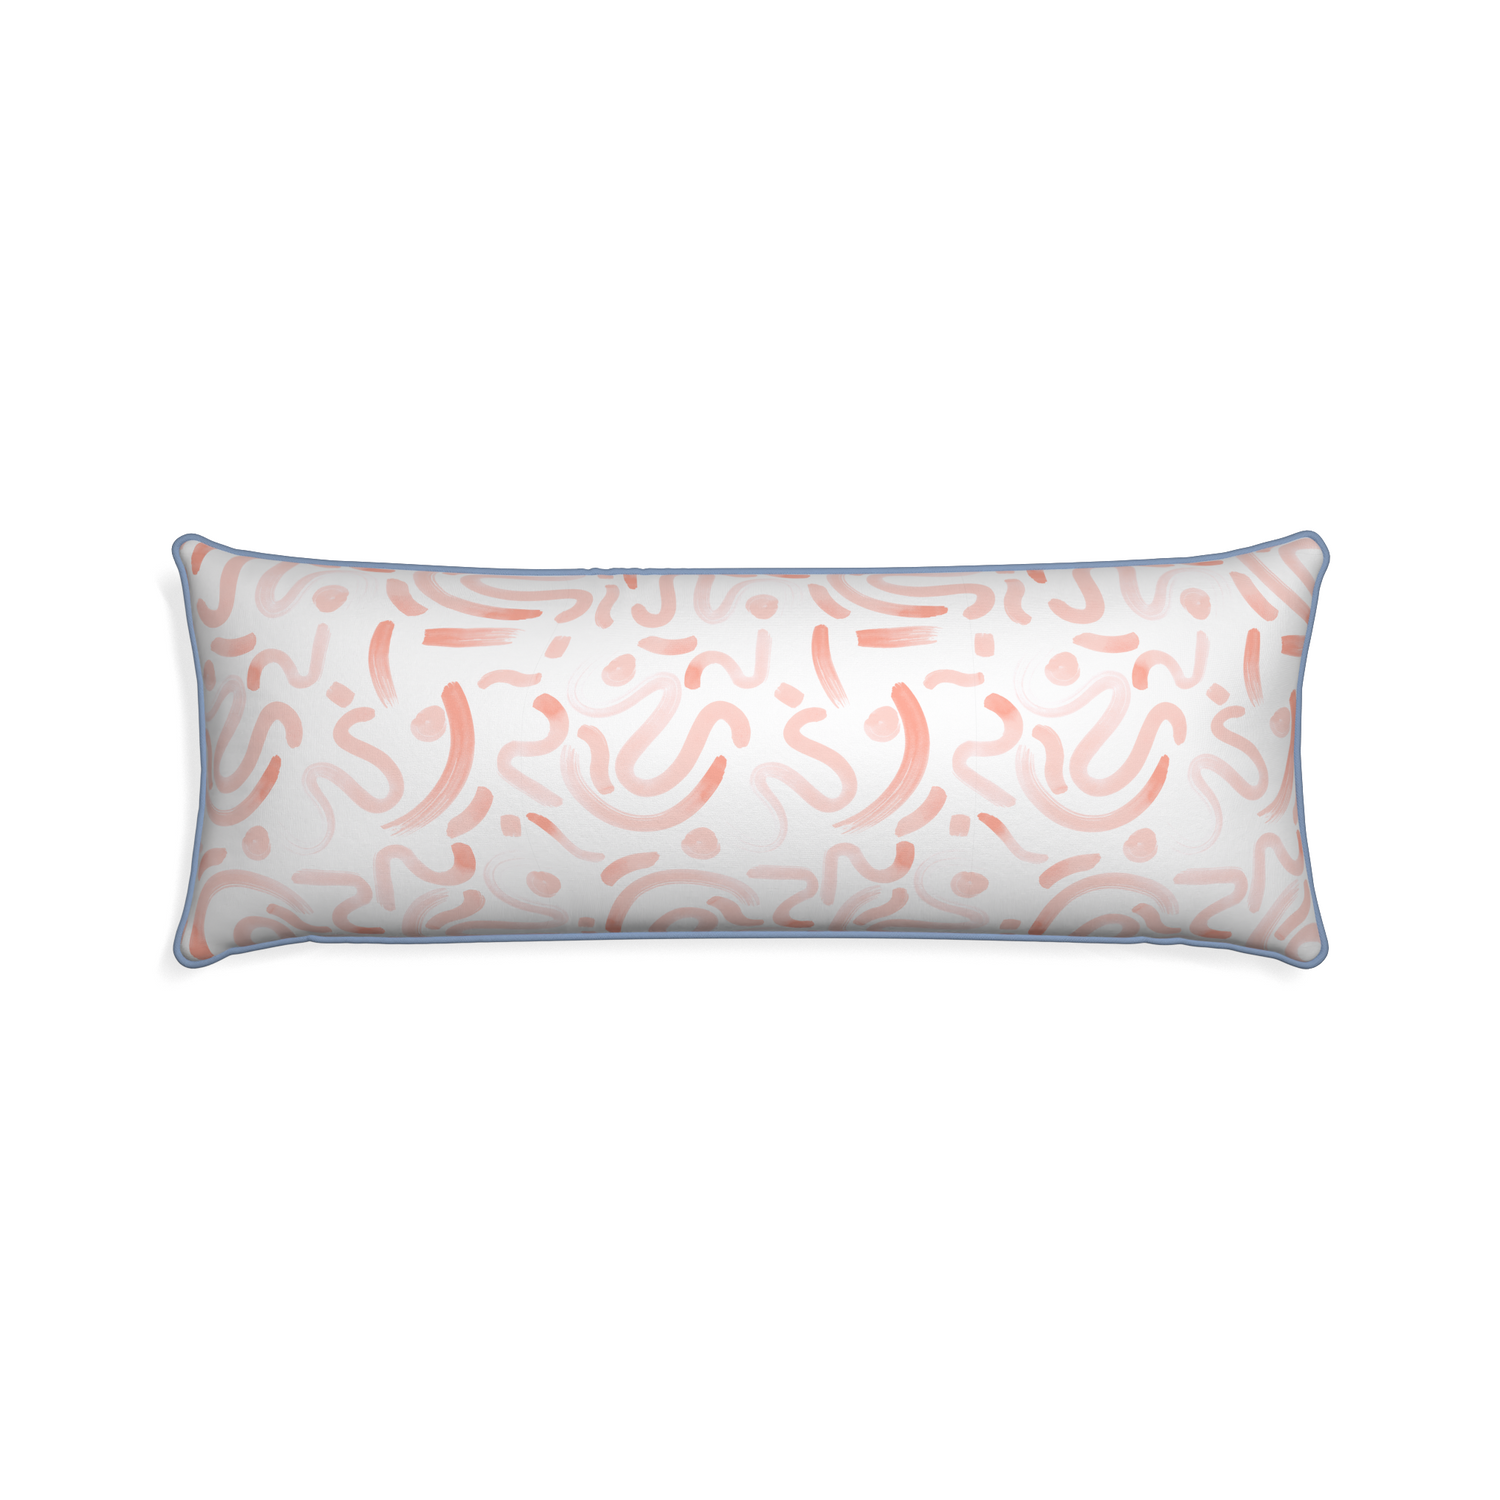 Xl-lumbar hockney pink custom pink graphicpillow with sky piping on white background